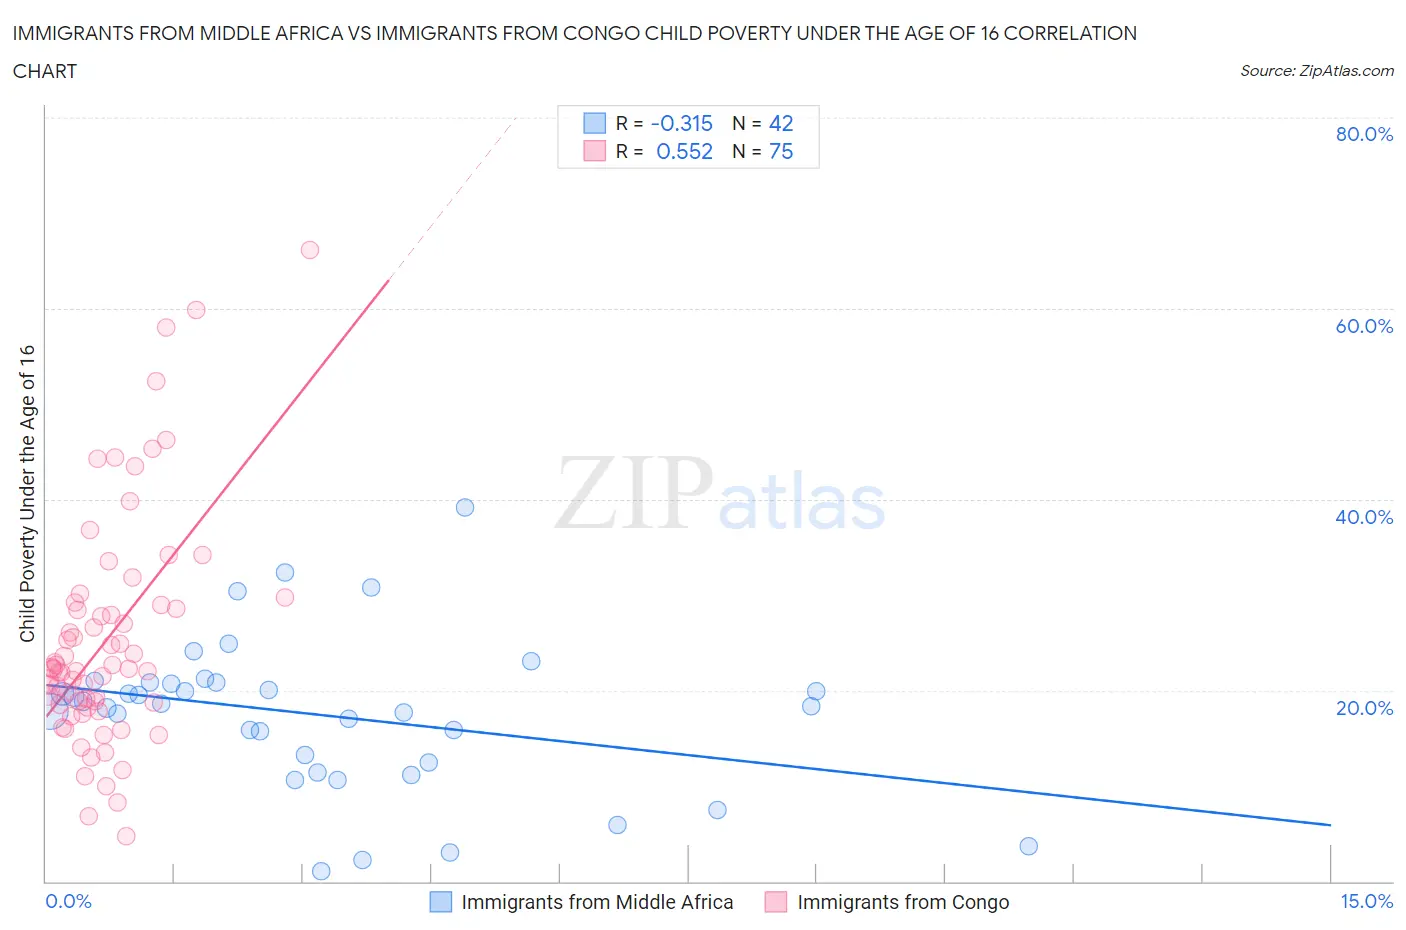 Immigrants from Middle Africa vs Immigrants from Congo Child Poverty Under the Age of 16